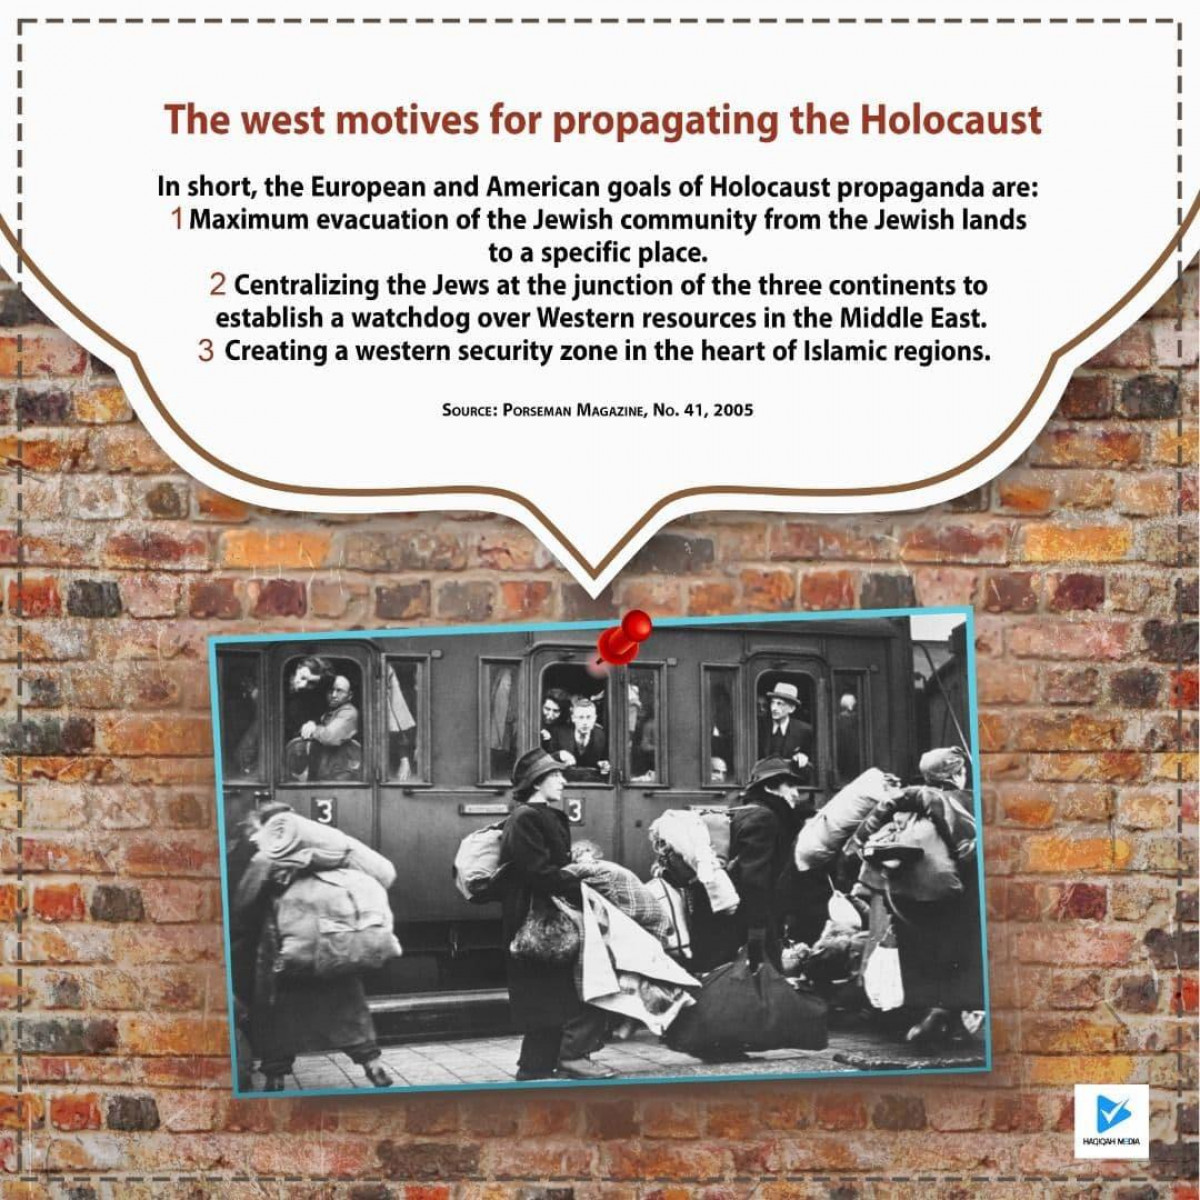 The west motives for propagating the Holocaust: